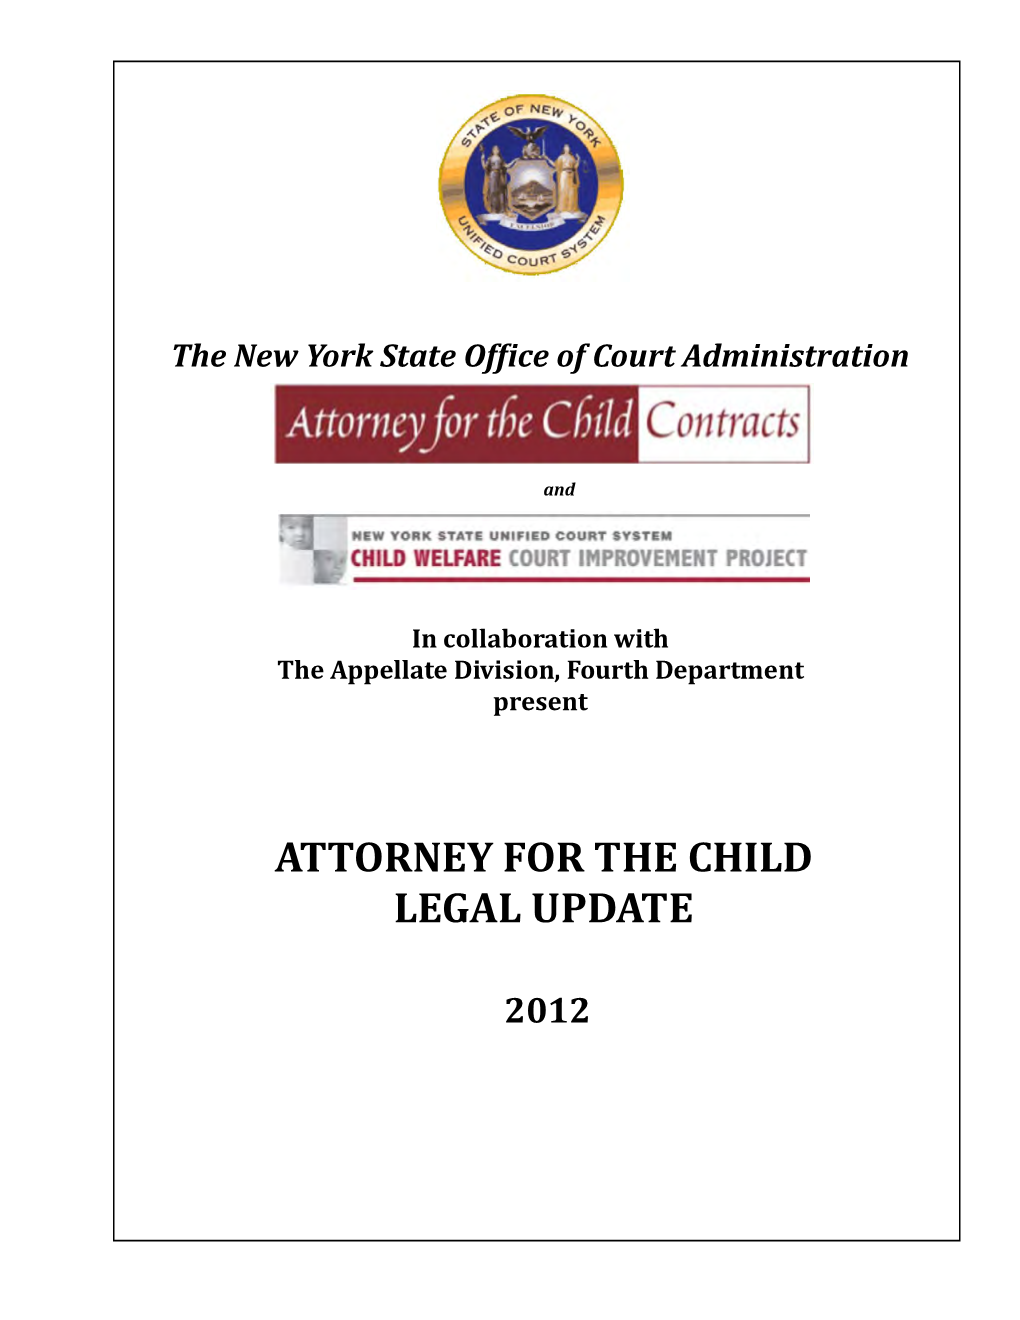 Attorney for the Child Legal Update